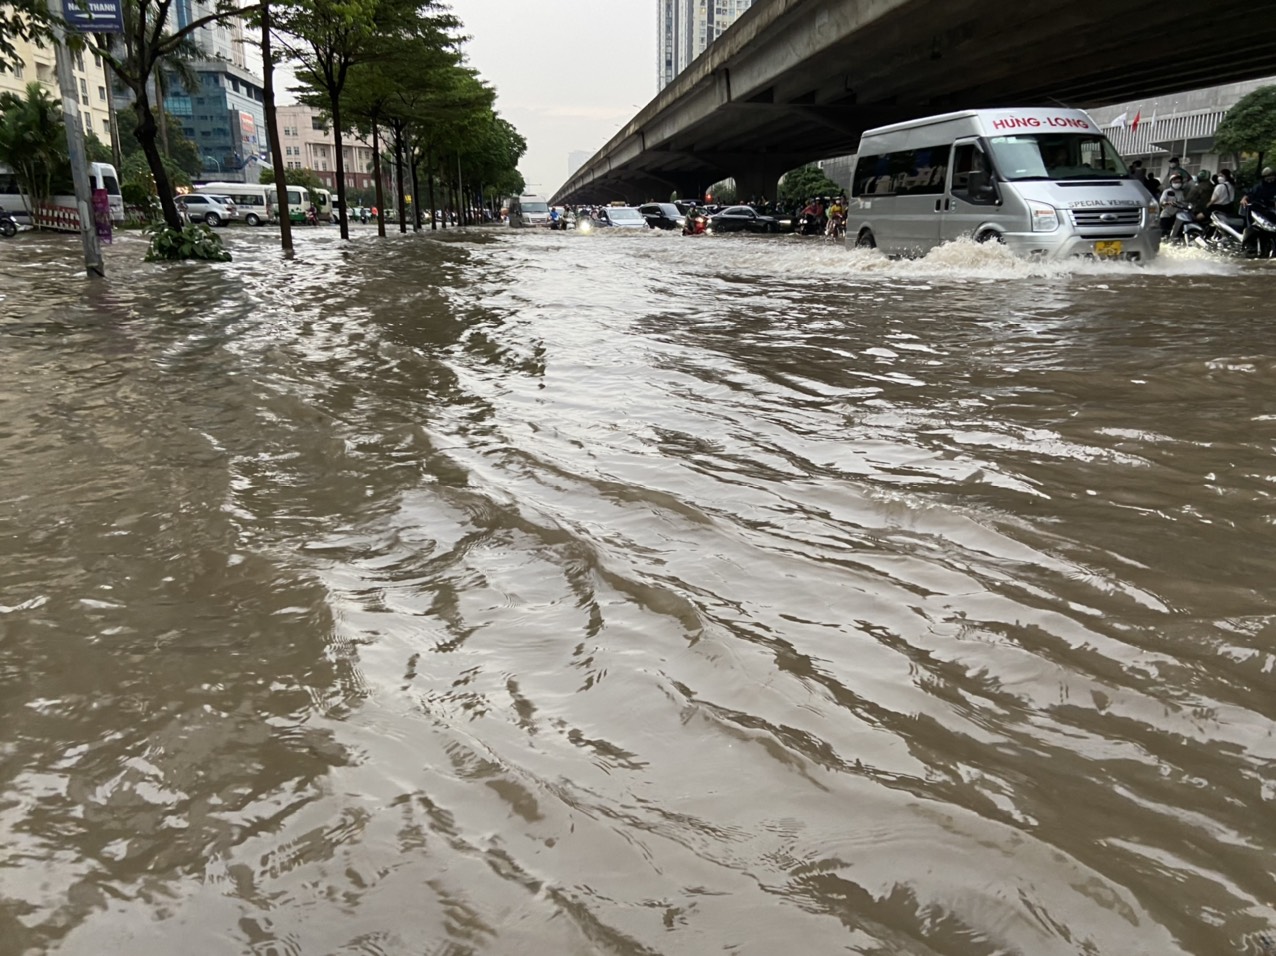 Vehicles wade through a flooded street in Nam Tu Liem District, Hanoi, May 29, 2022. Photo: Quang The / Tuoi Tre